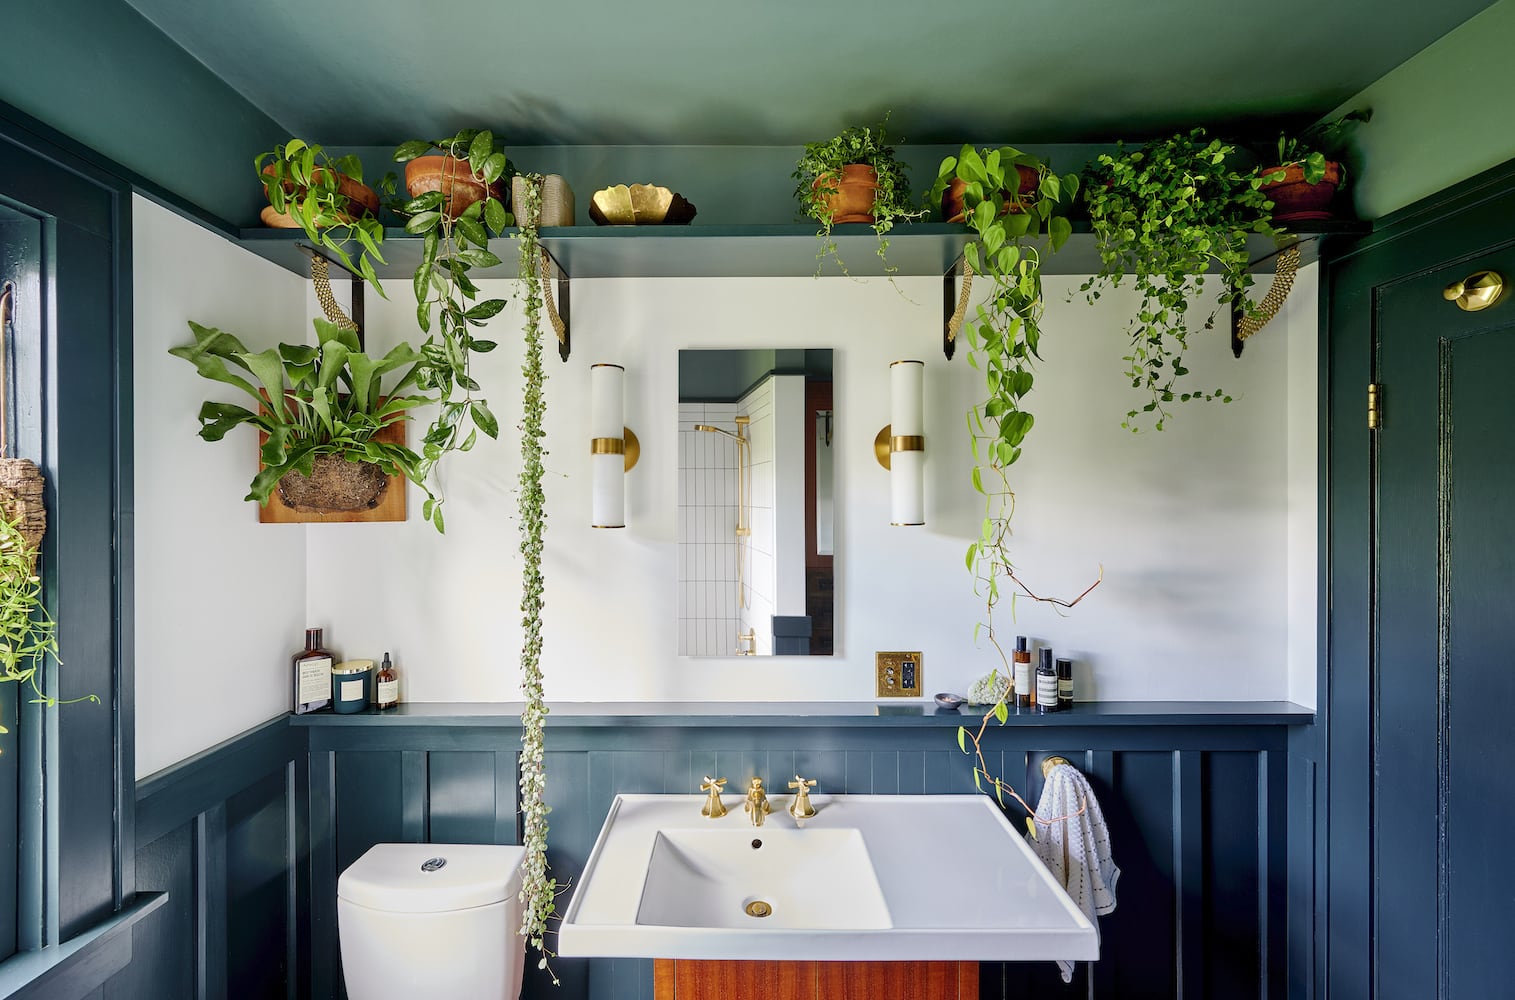 Portland bathroom with hanging plant shelf, green painted wainscot paneling